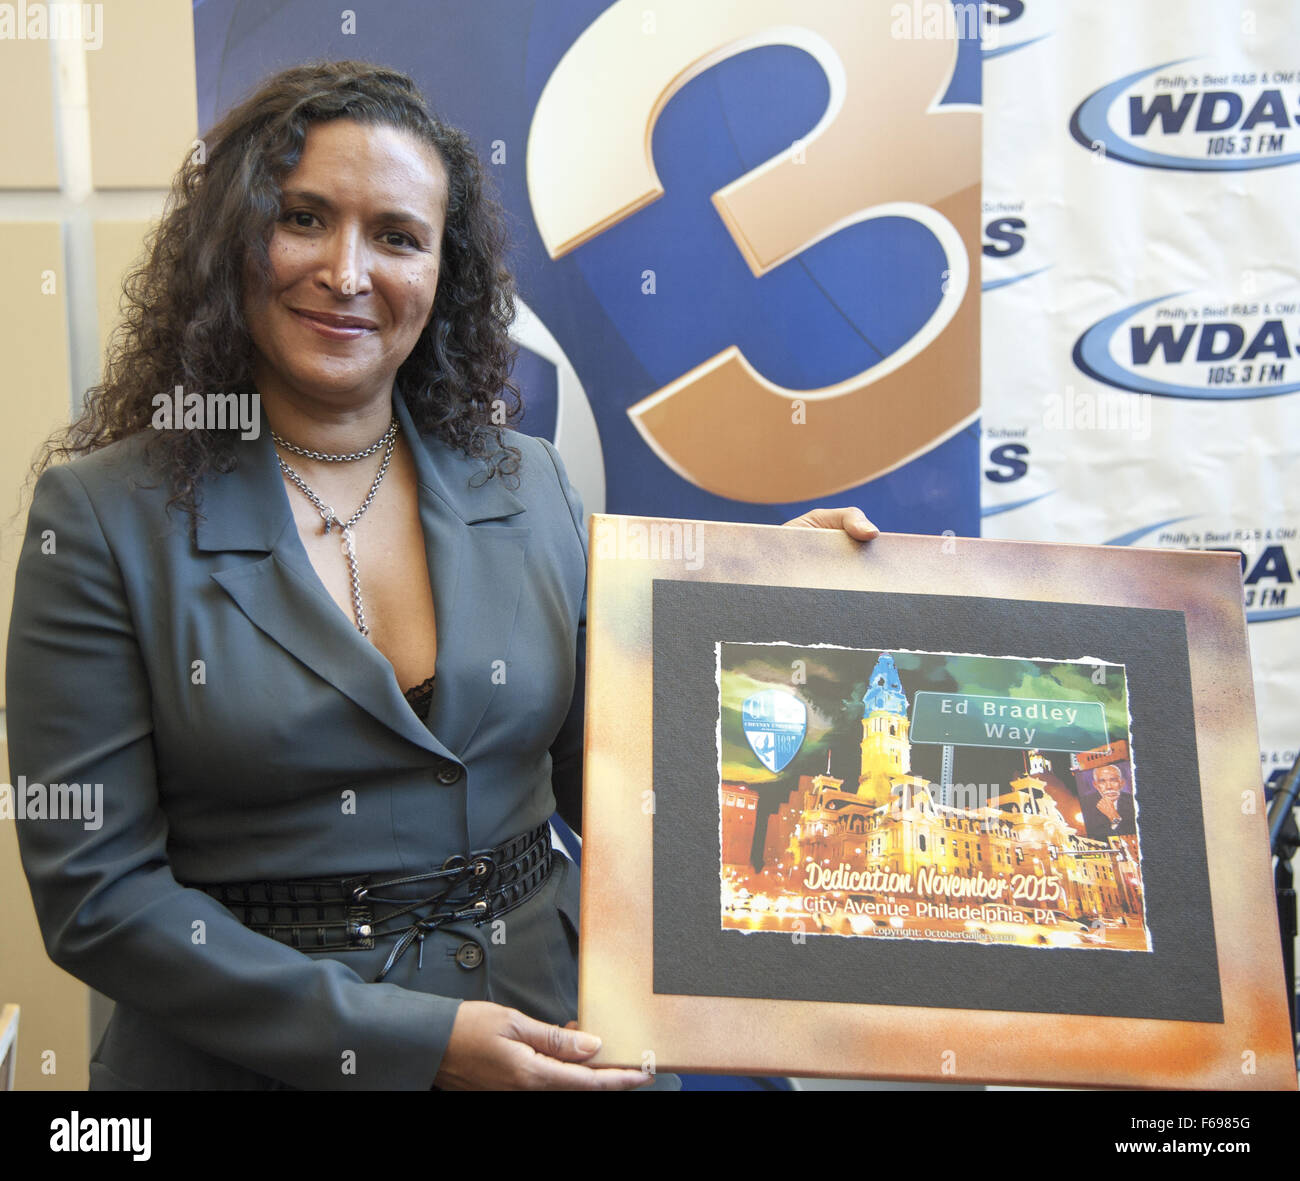 Philadelphia, Pennsylvania, USA. 14th Nov, 2015. PATRICIA BLANCHET, widow  of the late Ed Bradley holds a special painting from the October Art  Gallery in celebration of her late husband The dedication ceremonies